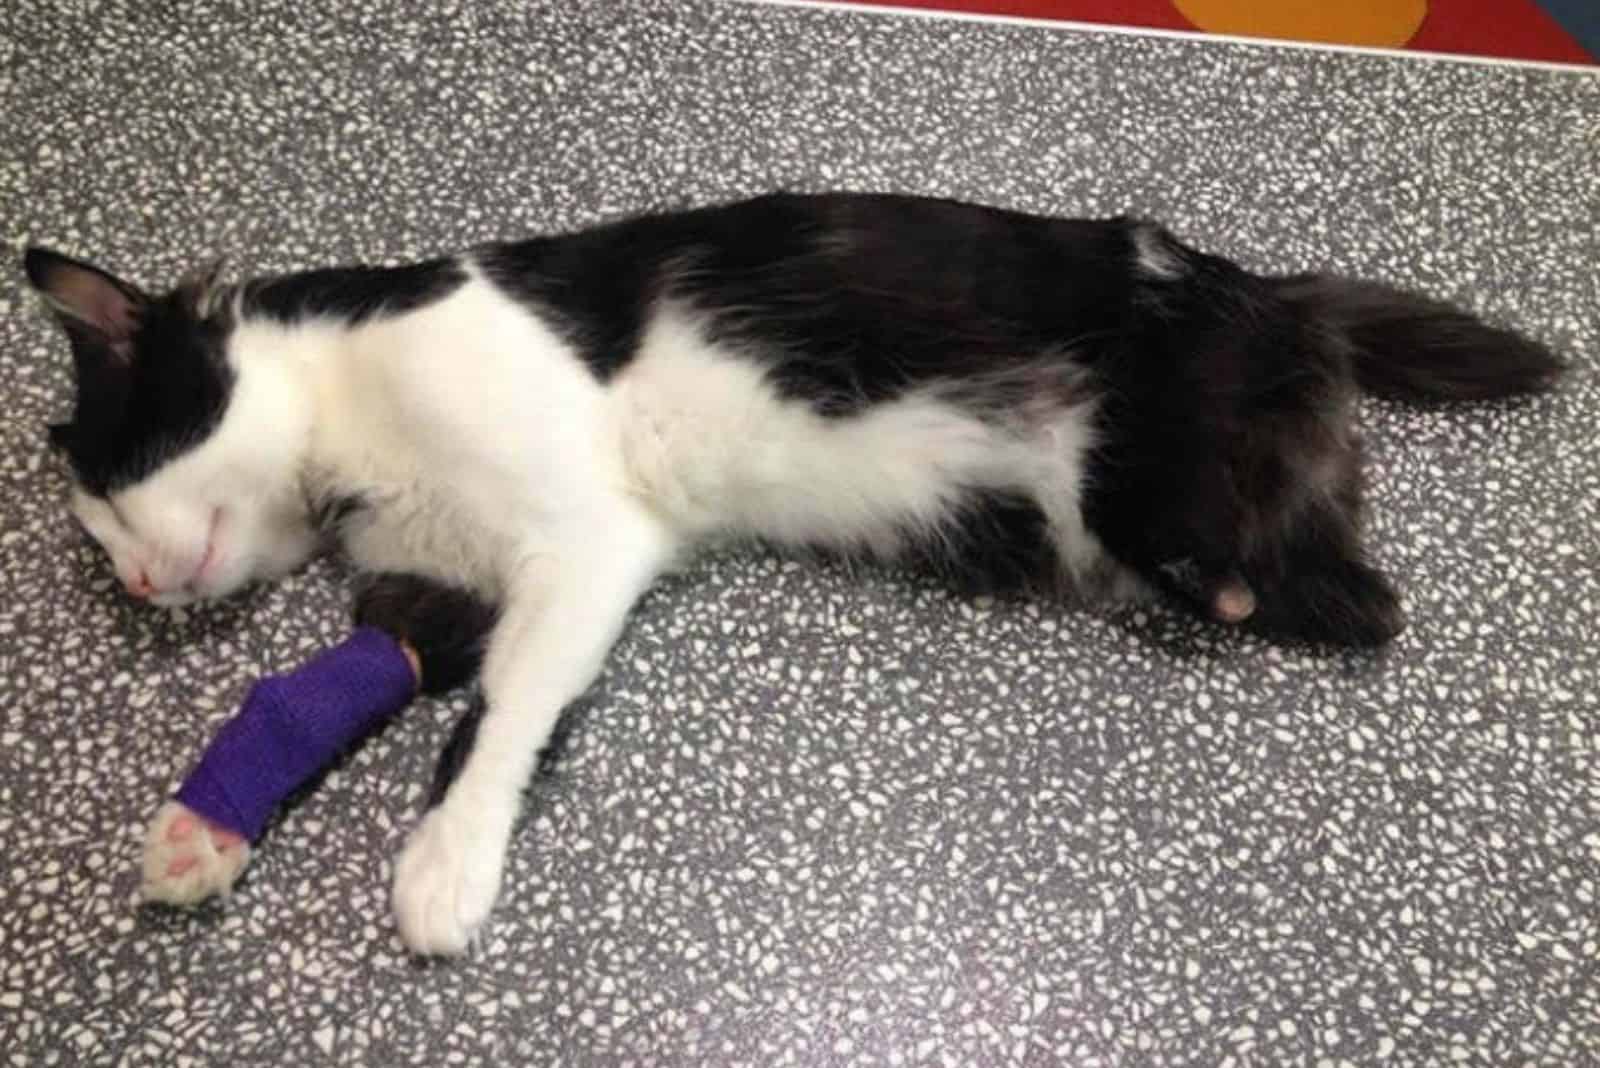 the rescued cat lies with its paw wrapped